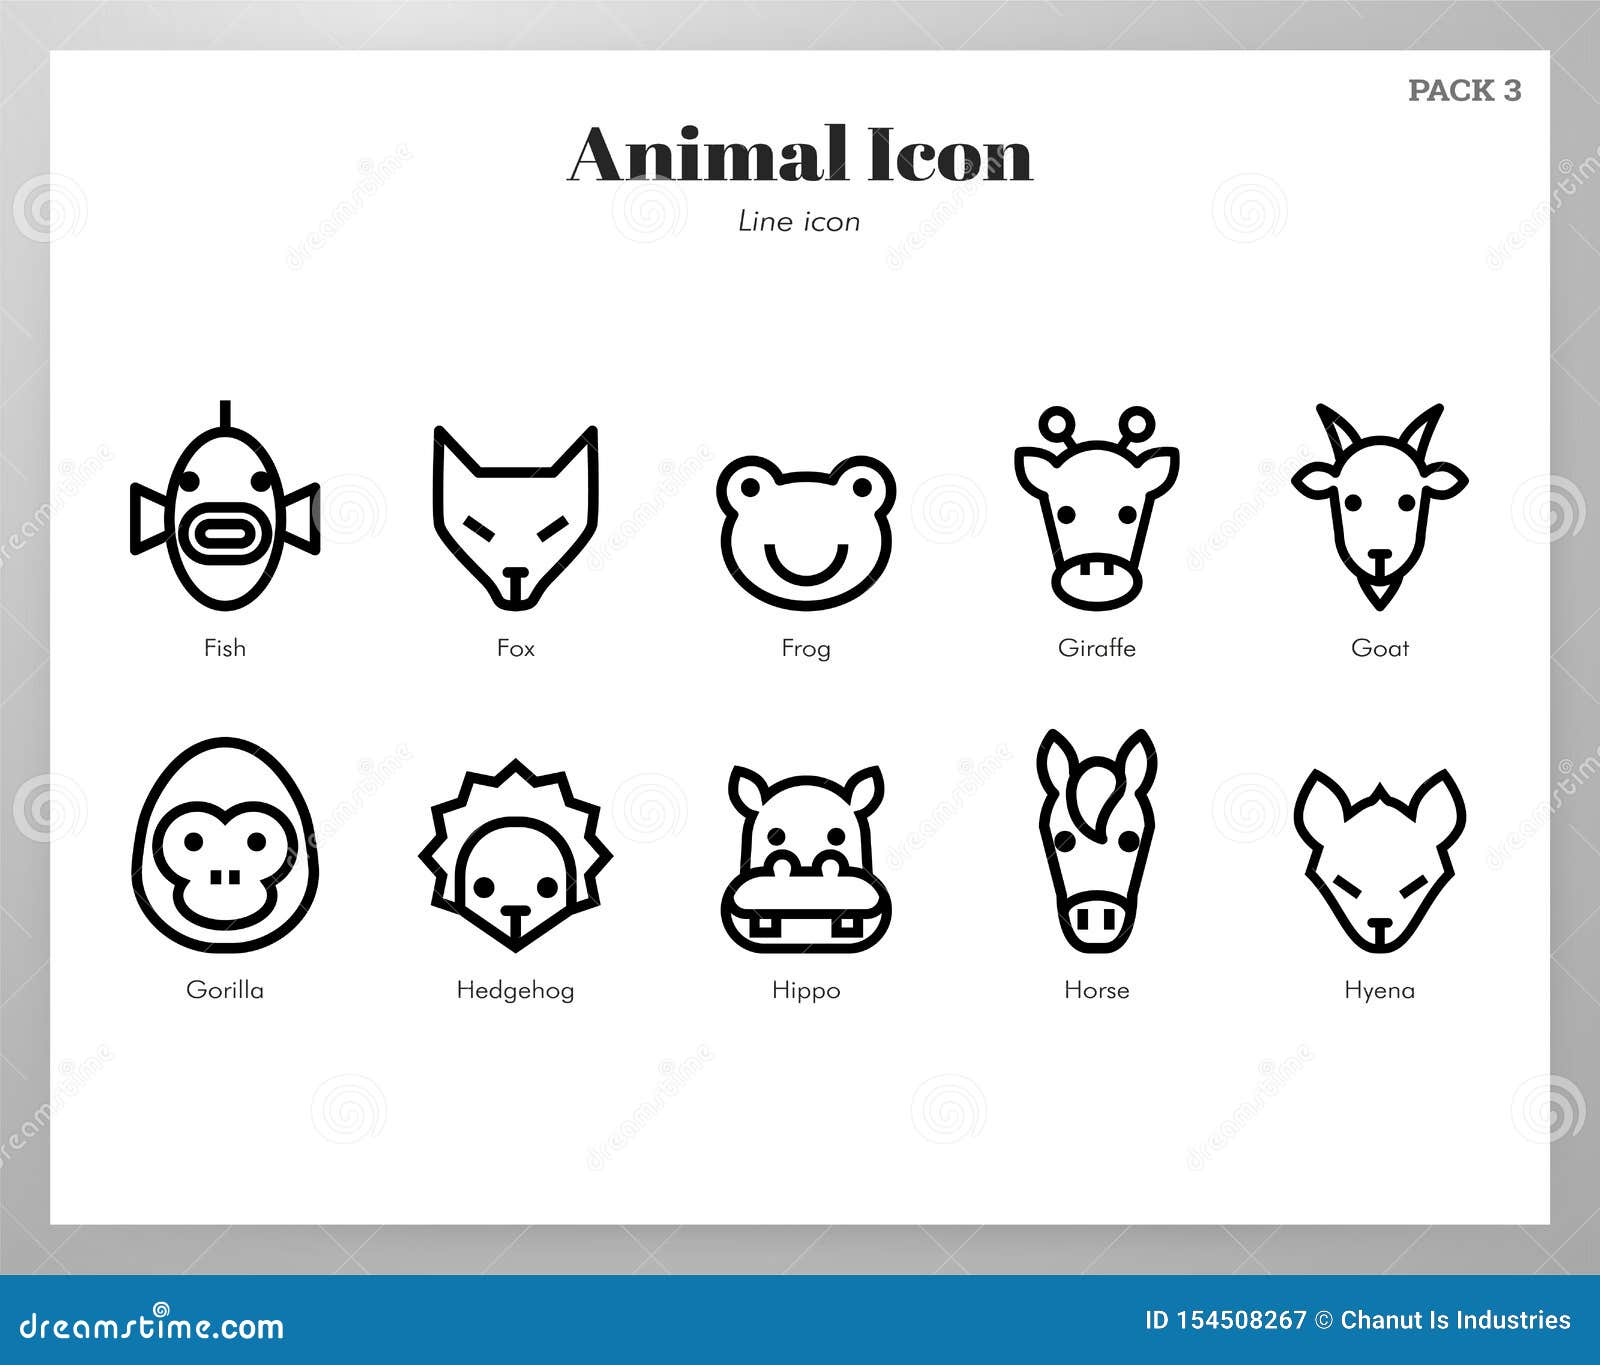 animal icons line pack